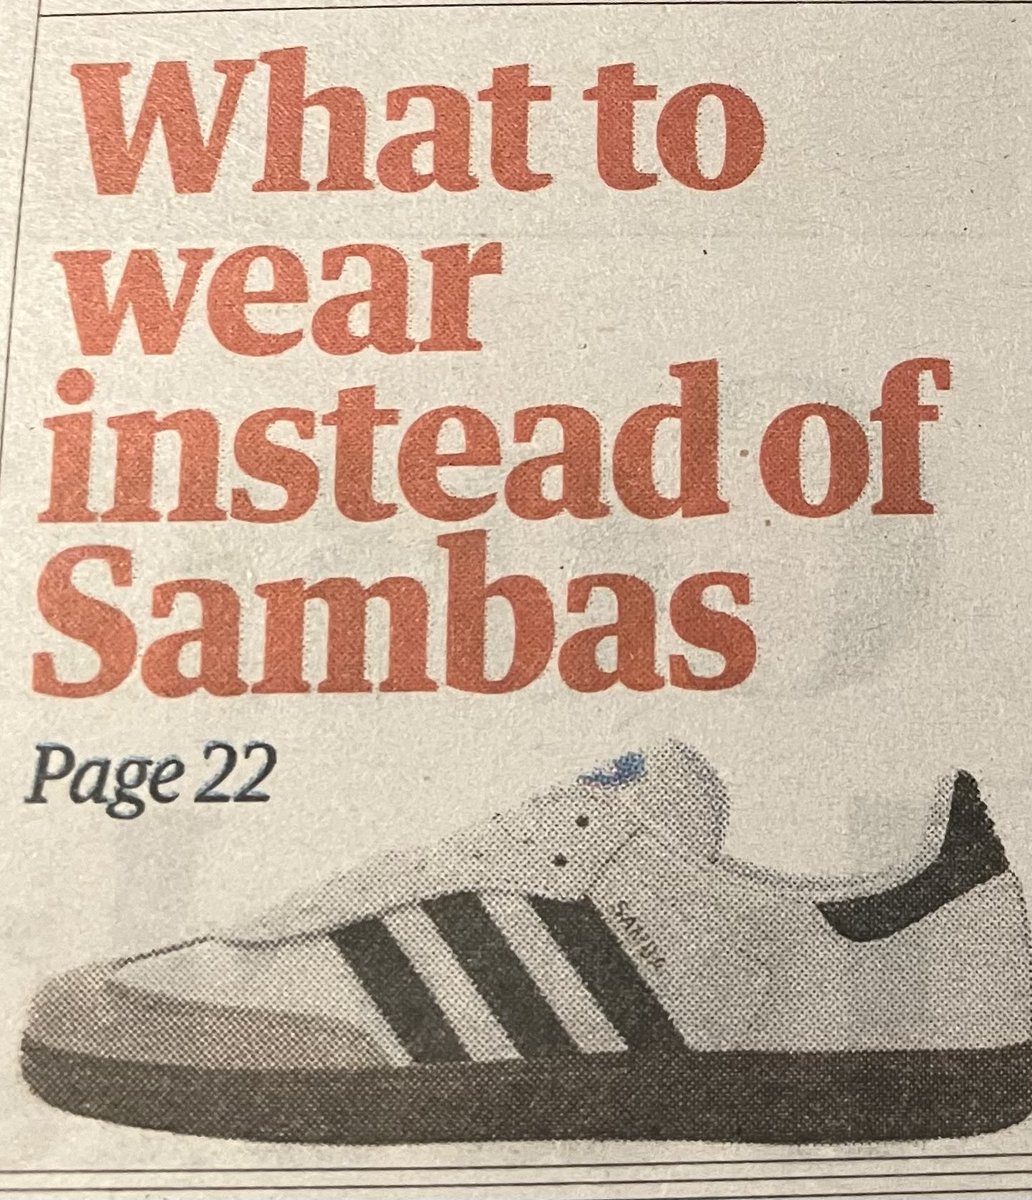 The Guardian today addressing the most pressing issue of the week.